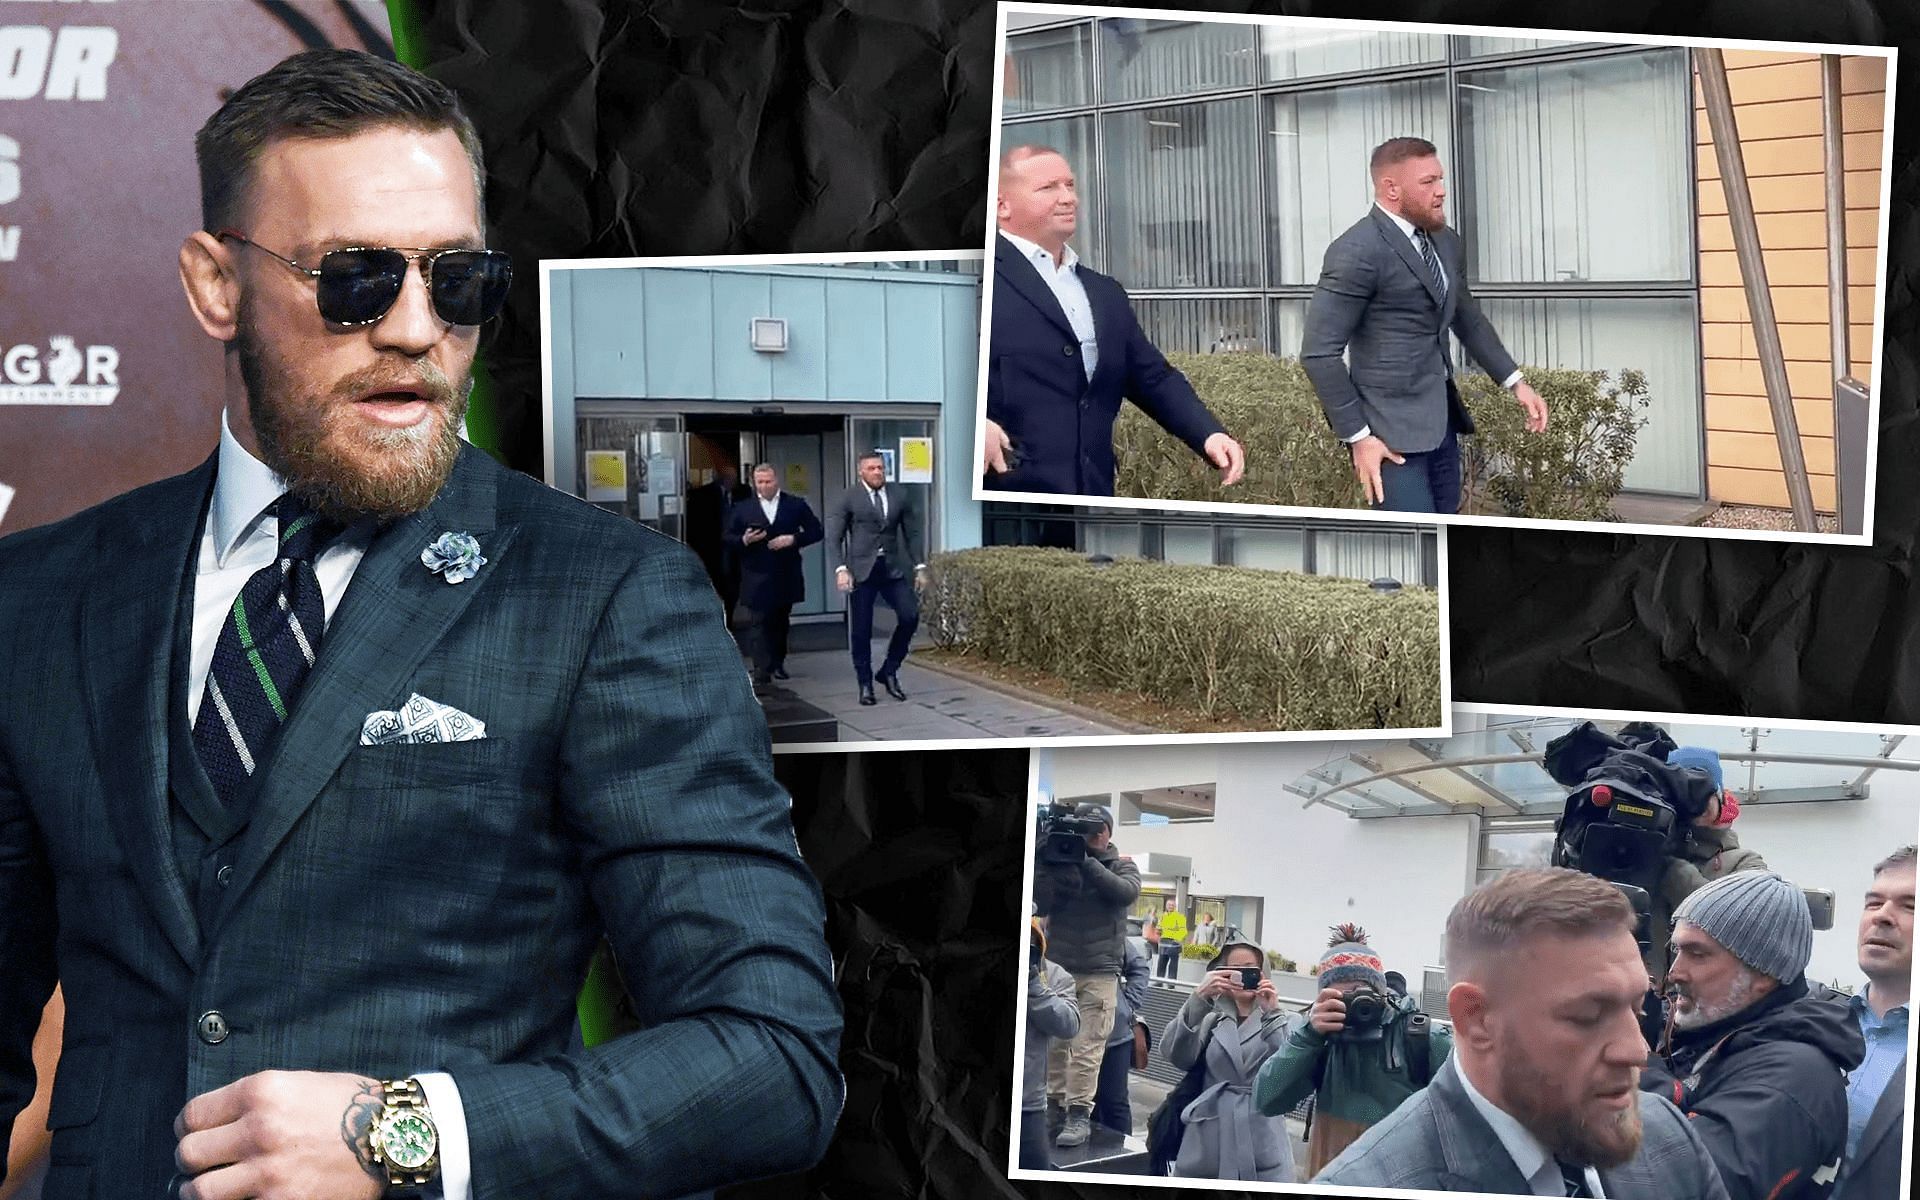 Conor McGregor appears at a Dublin court [Left image courtesy - Getty; right images courtesy - @Healyhack on Twitter]